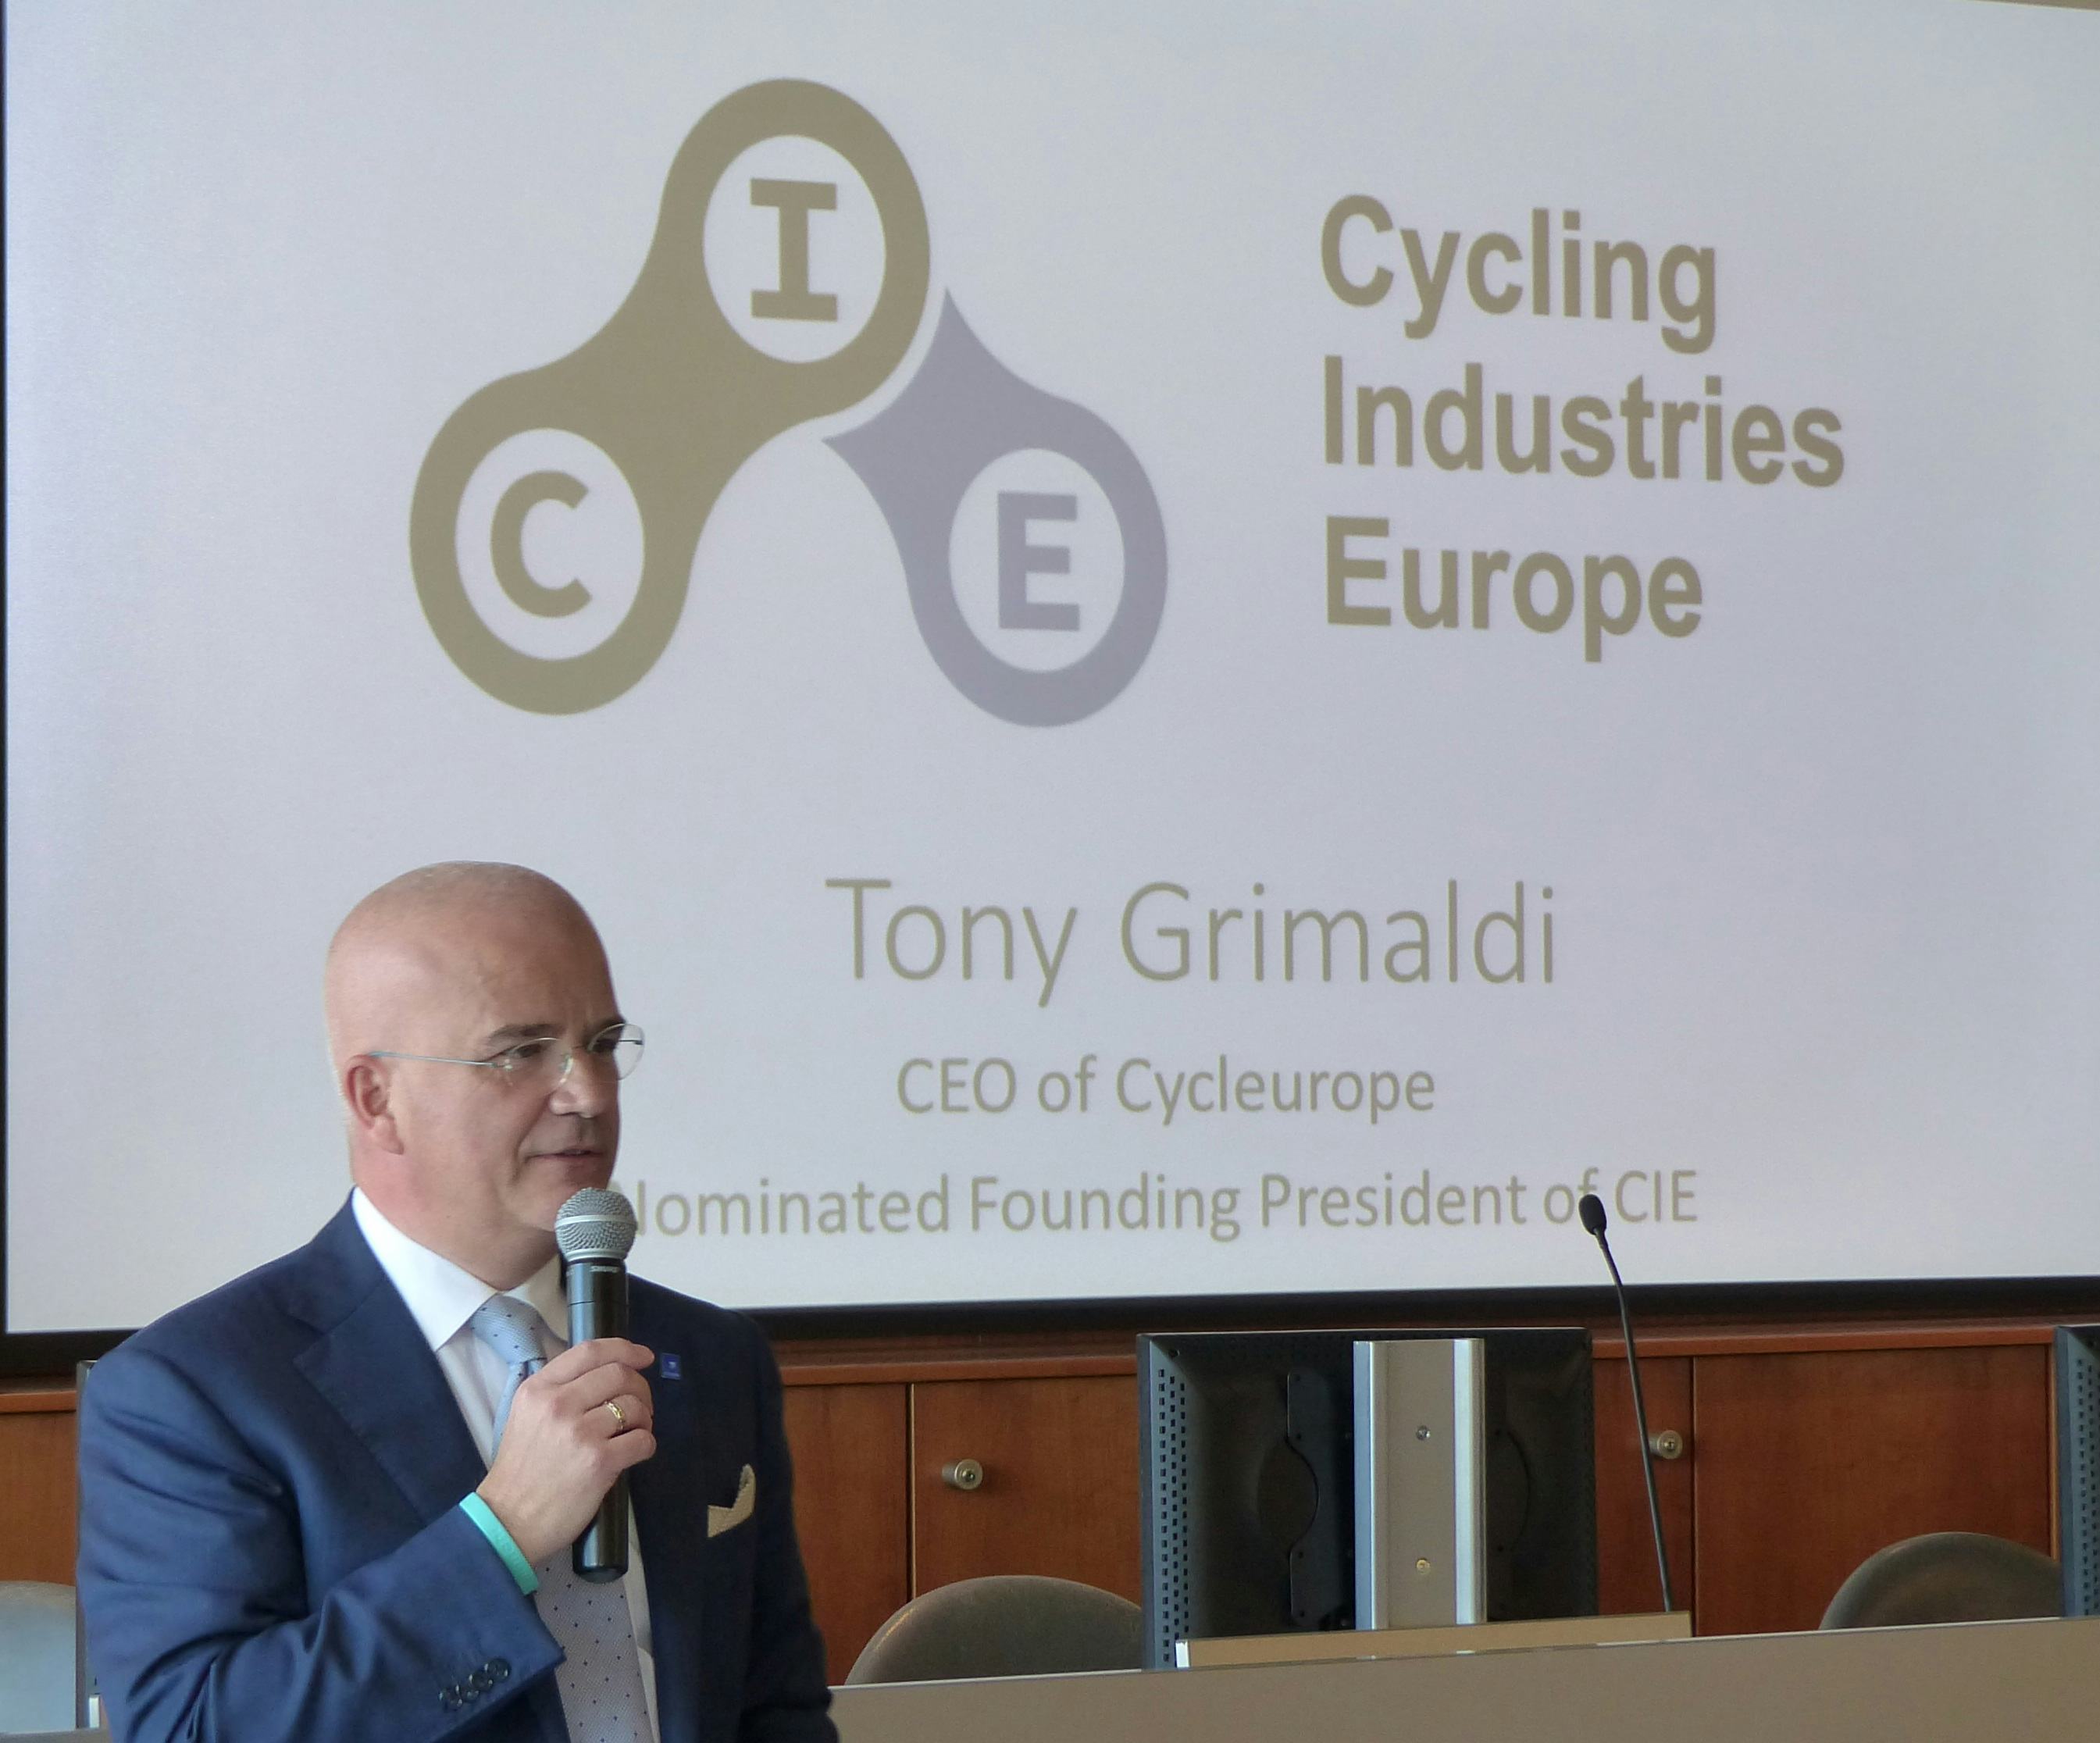 Cycleurope CEO Tony Grimaldi was elected founding President of the new advocacy organization in Brussels. – Photo Bike Europe